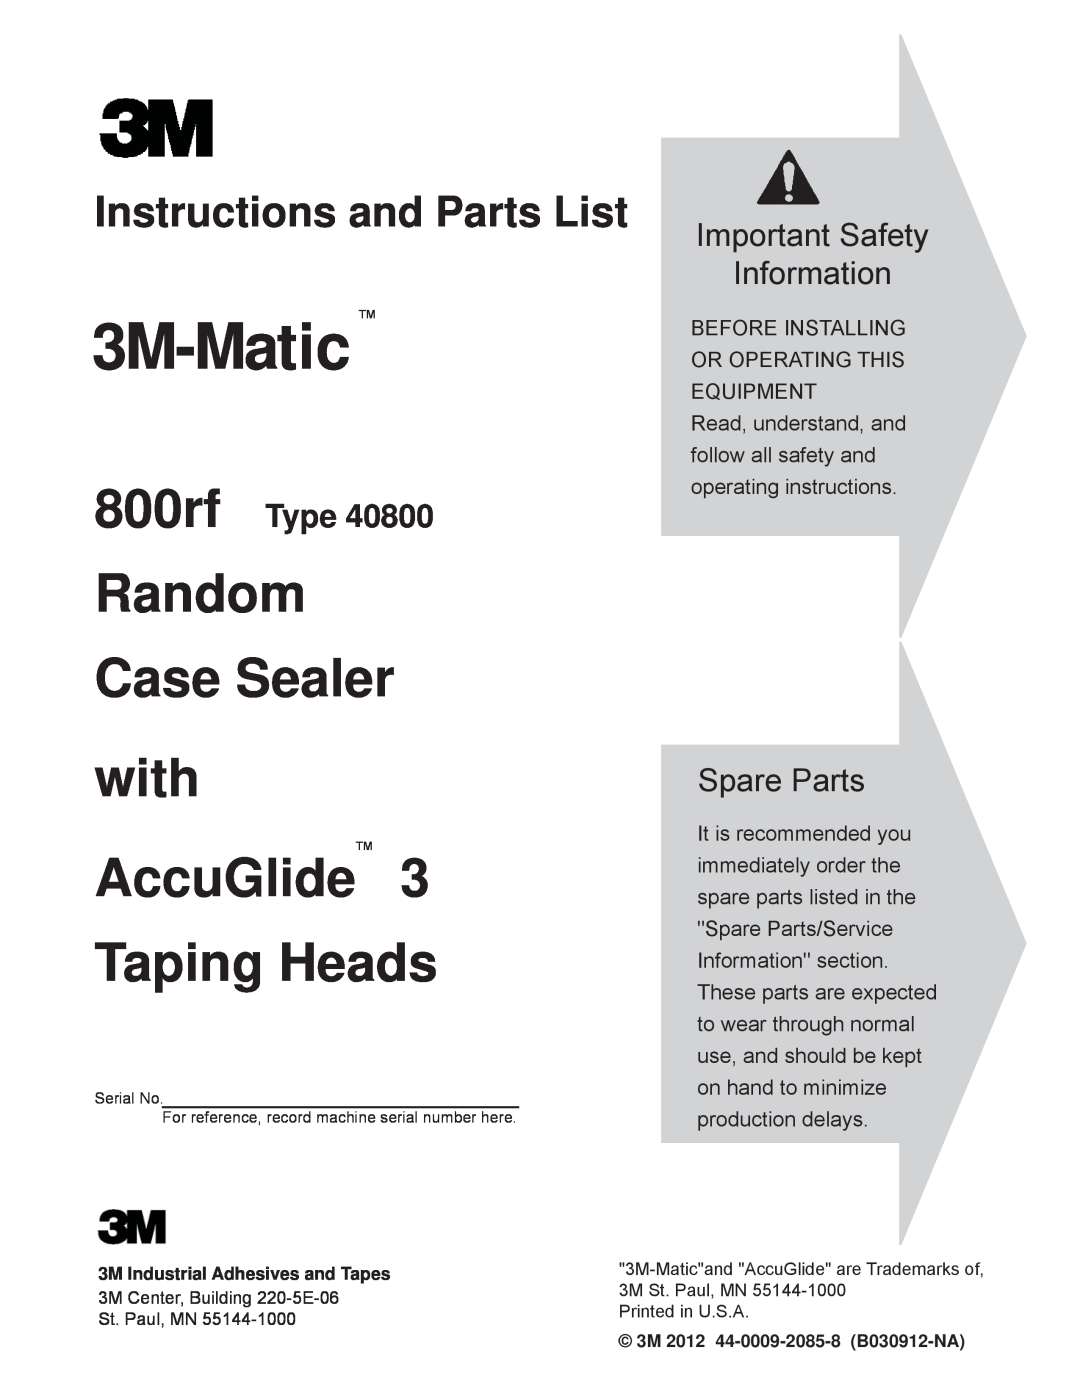 3M 40800 operating instructions Adjustable, Case Sealer, with, AccuGlide, Taping Heads, Important Safety, Information 